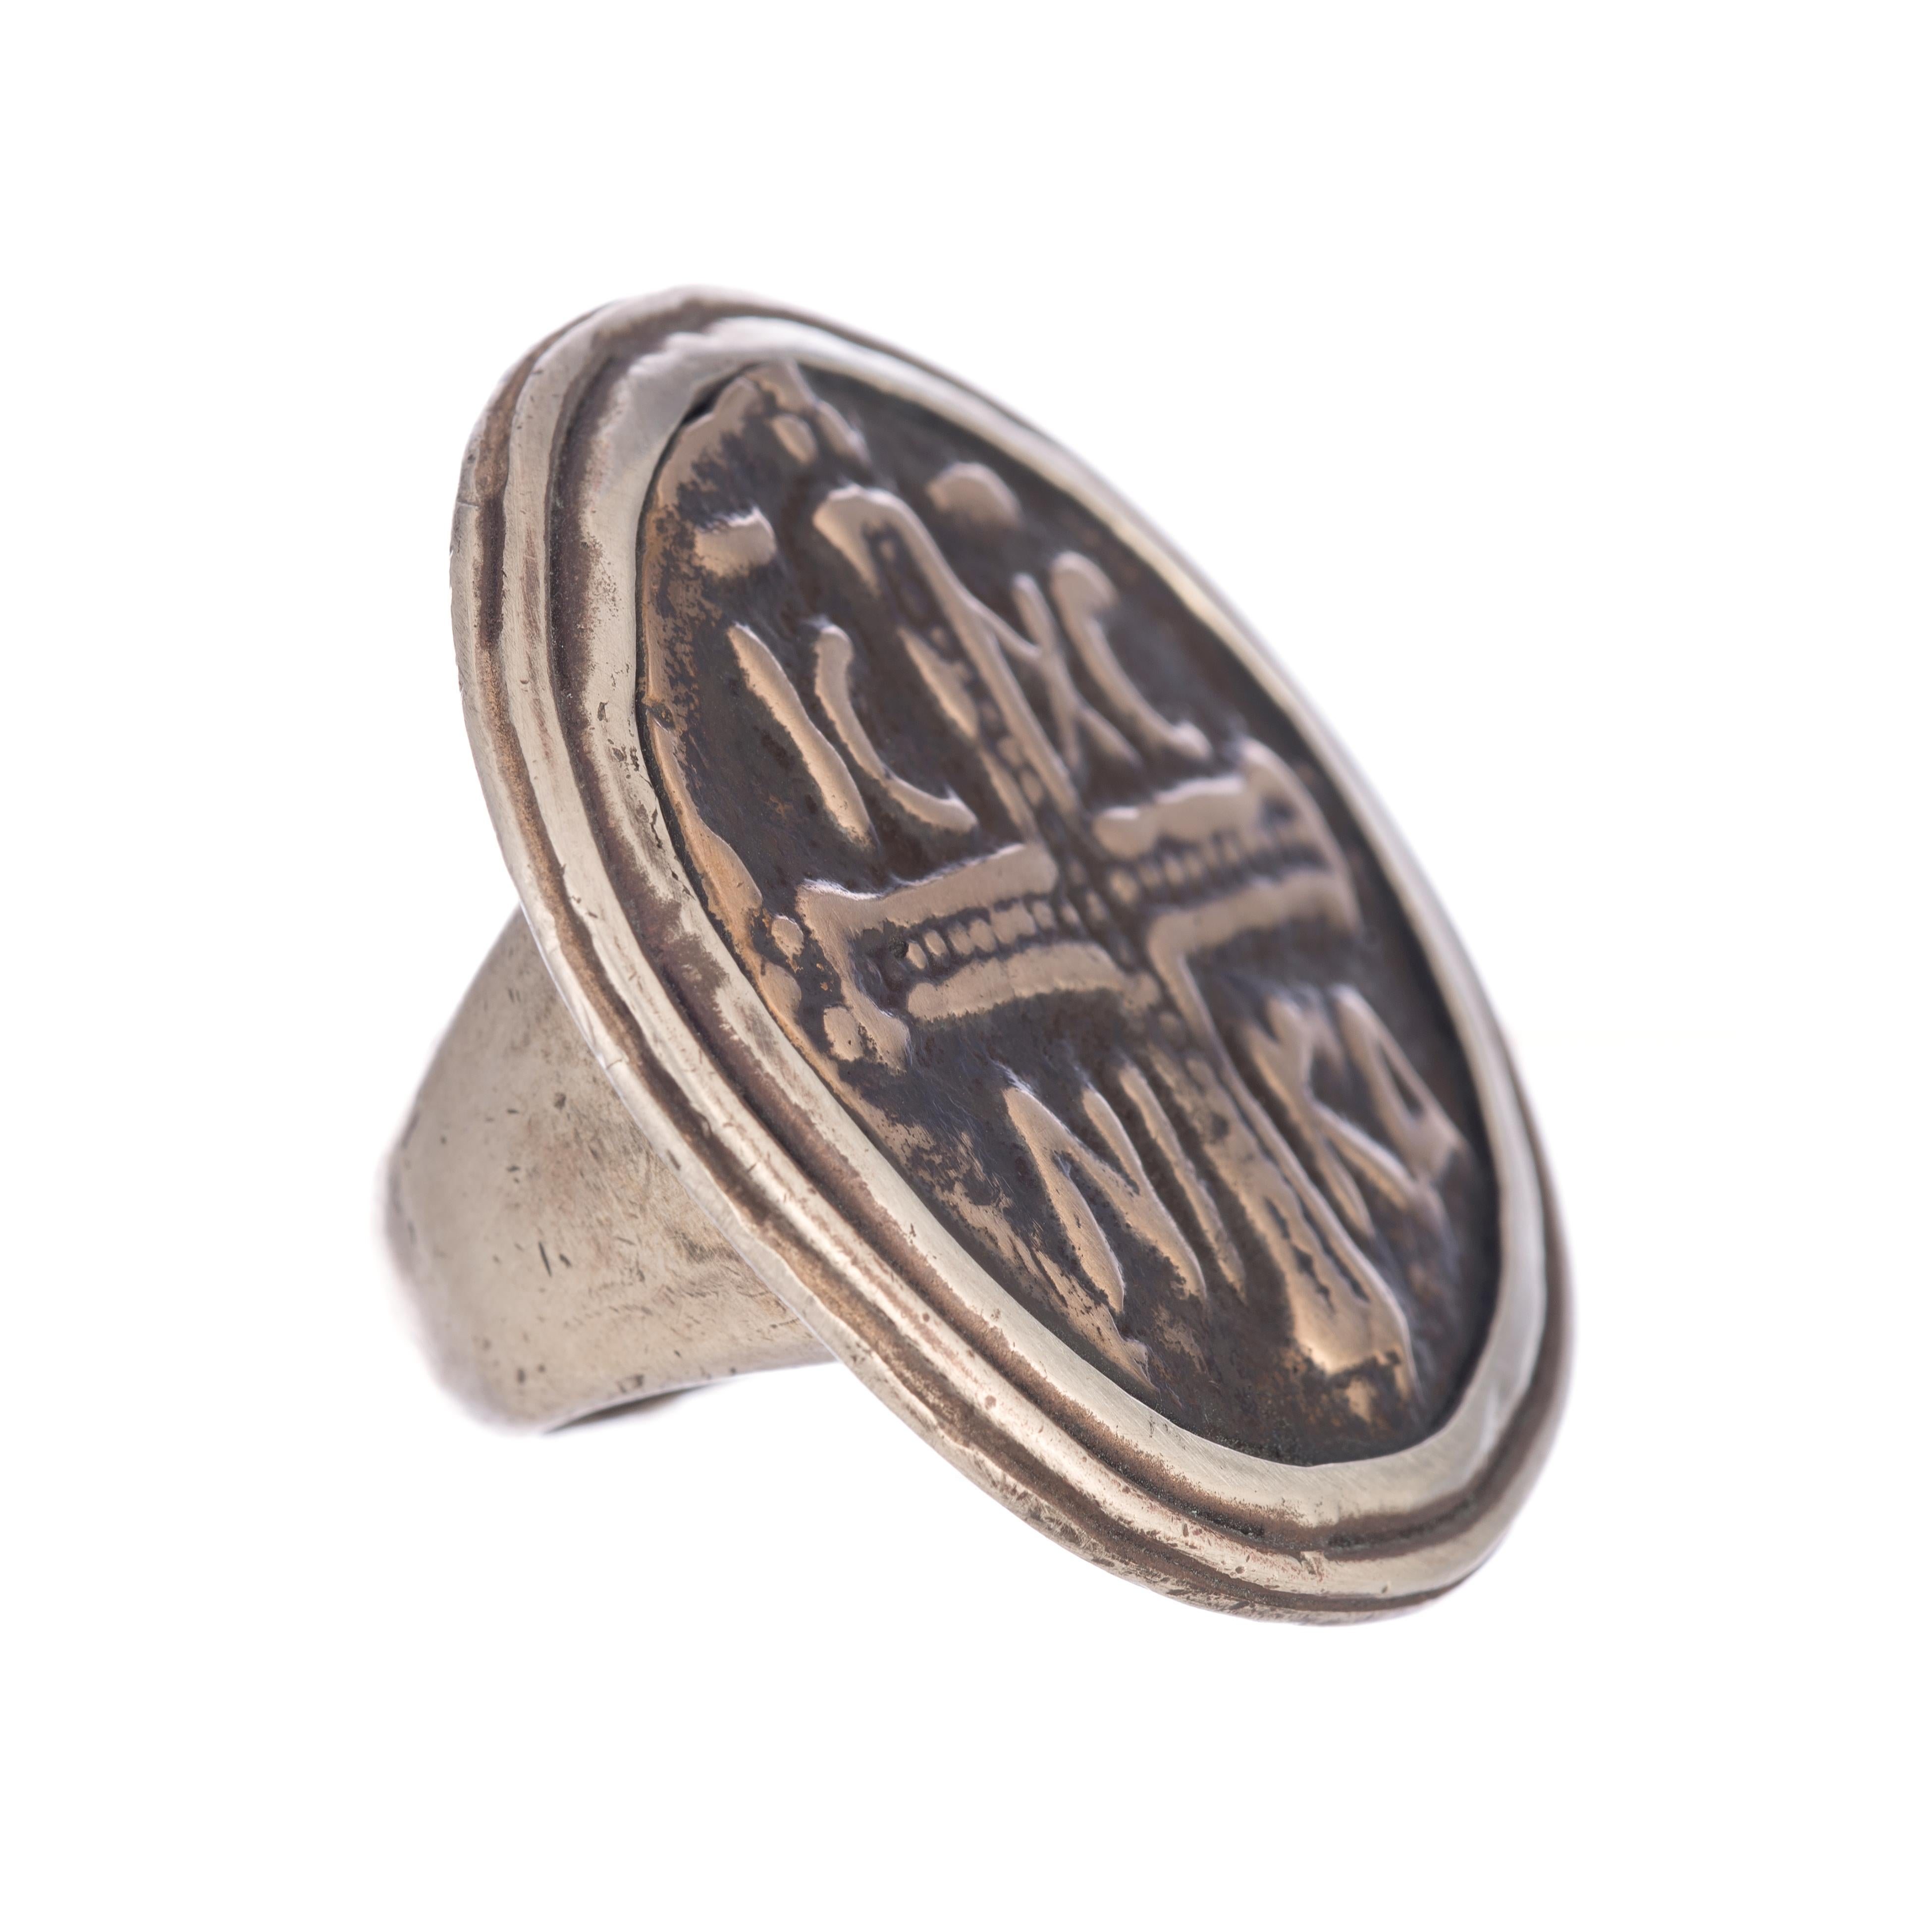 In the Name of the Father Coin ring by Shannon Koszyk.  Sterling wrapped bronze cross coin.  in the name of the father coin measures 1 3/4